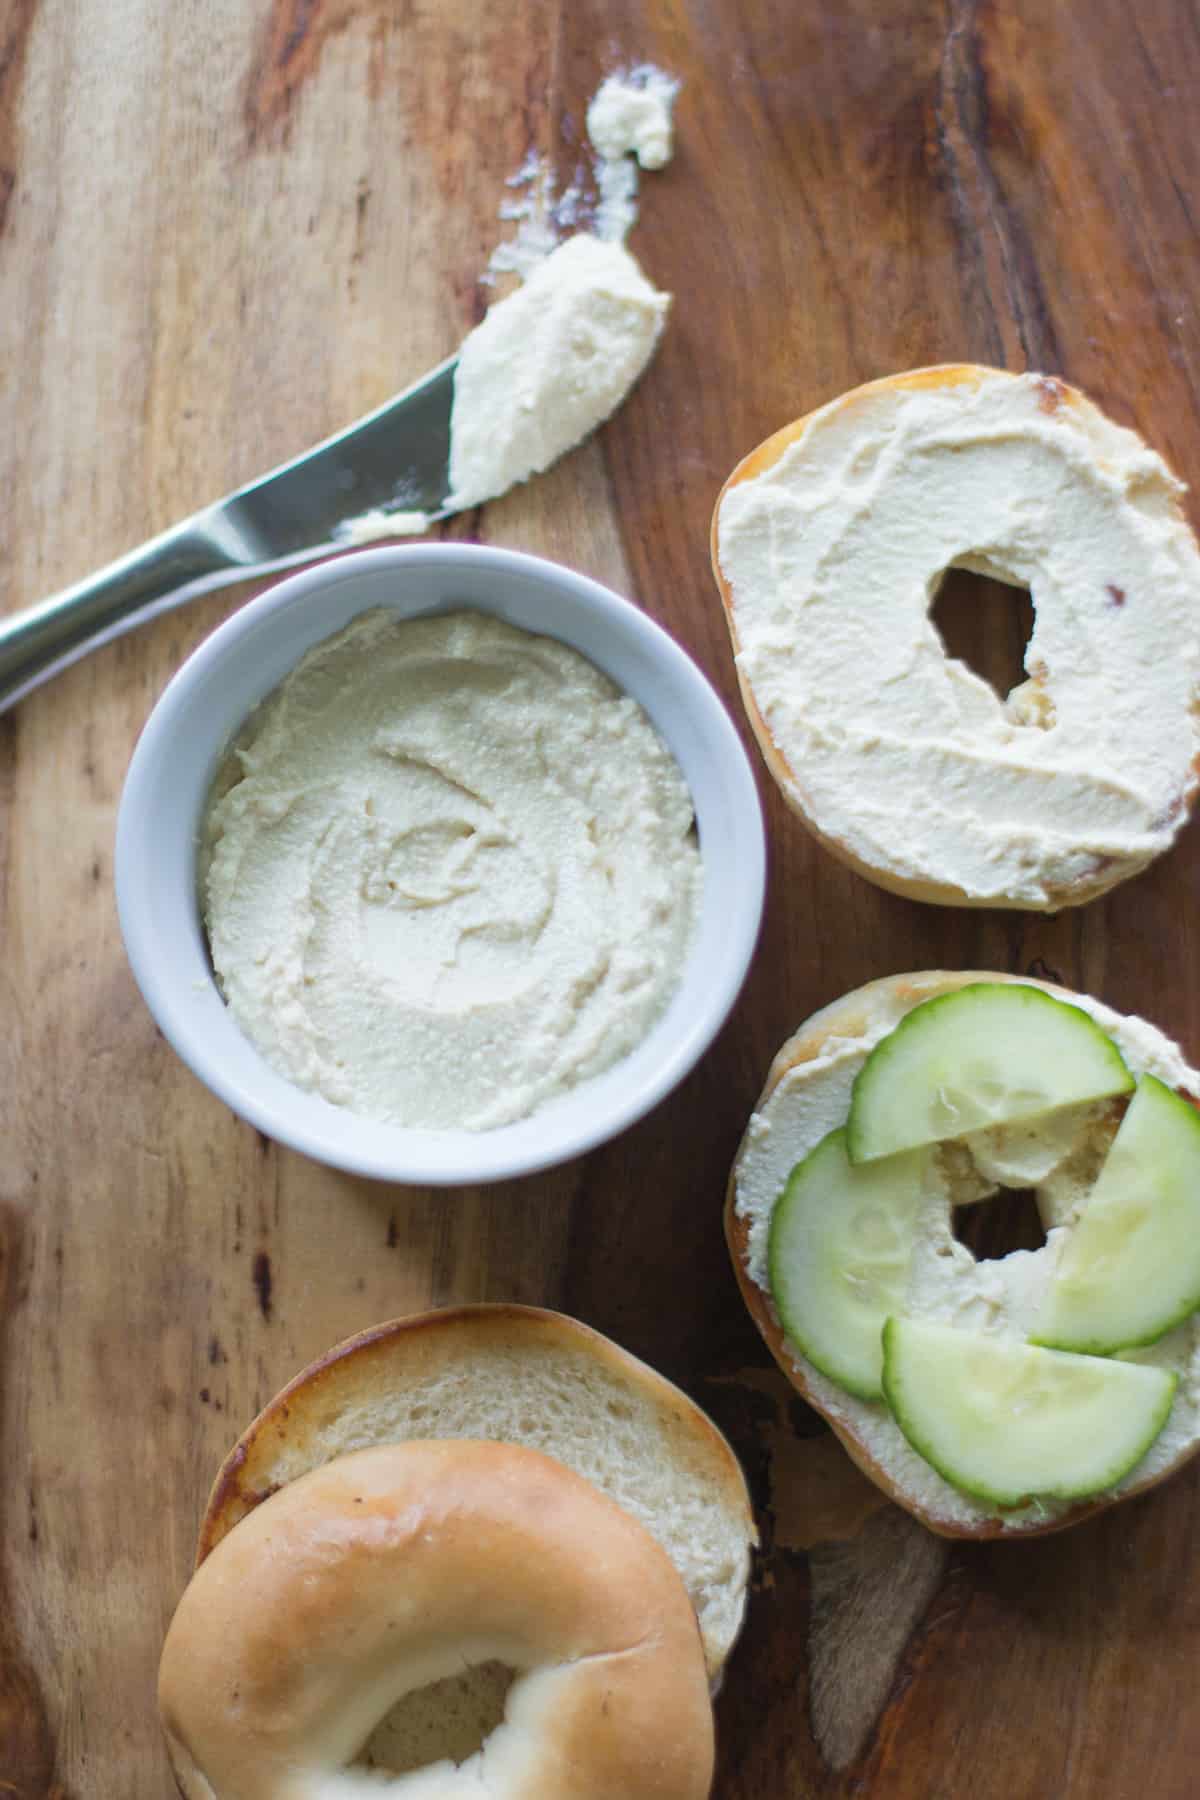 Tofu cream cheese in a small bowl and spread on toasted bagel with cream cheese.